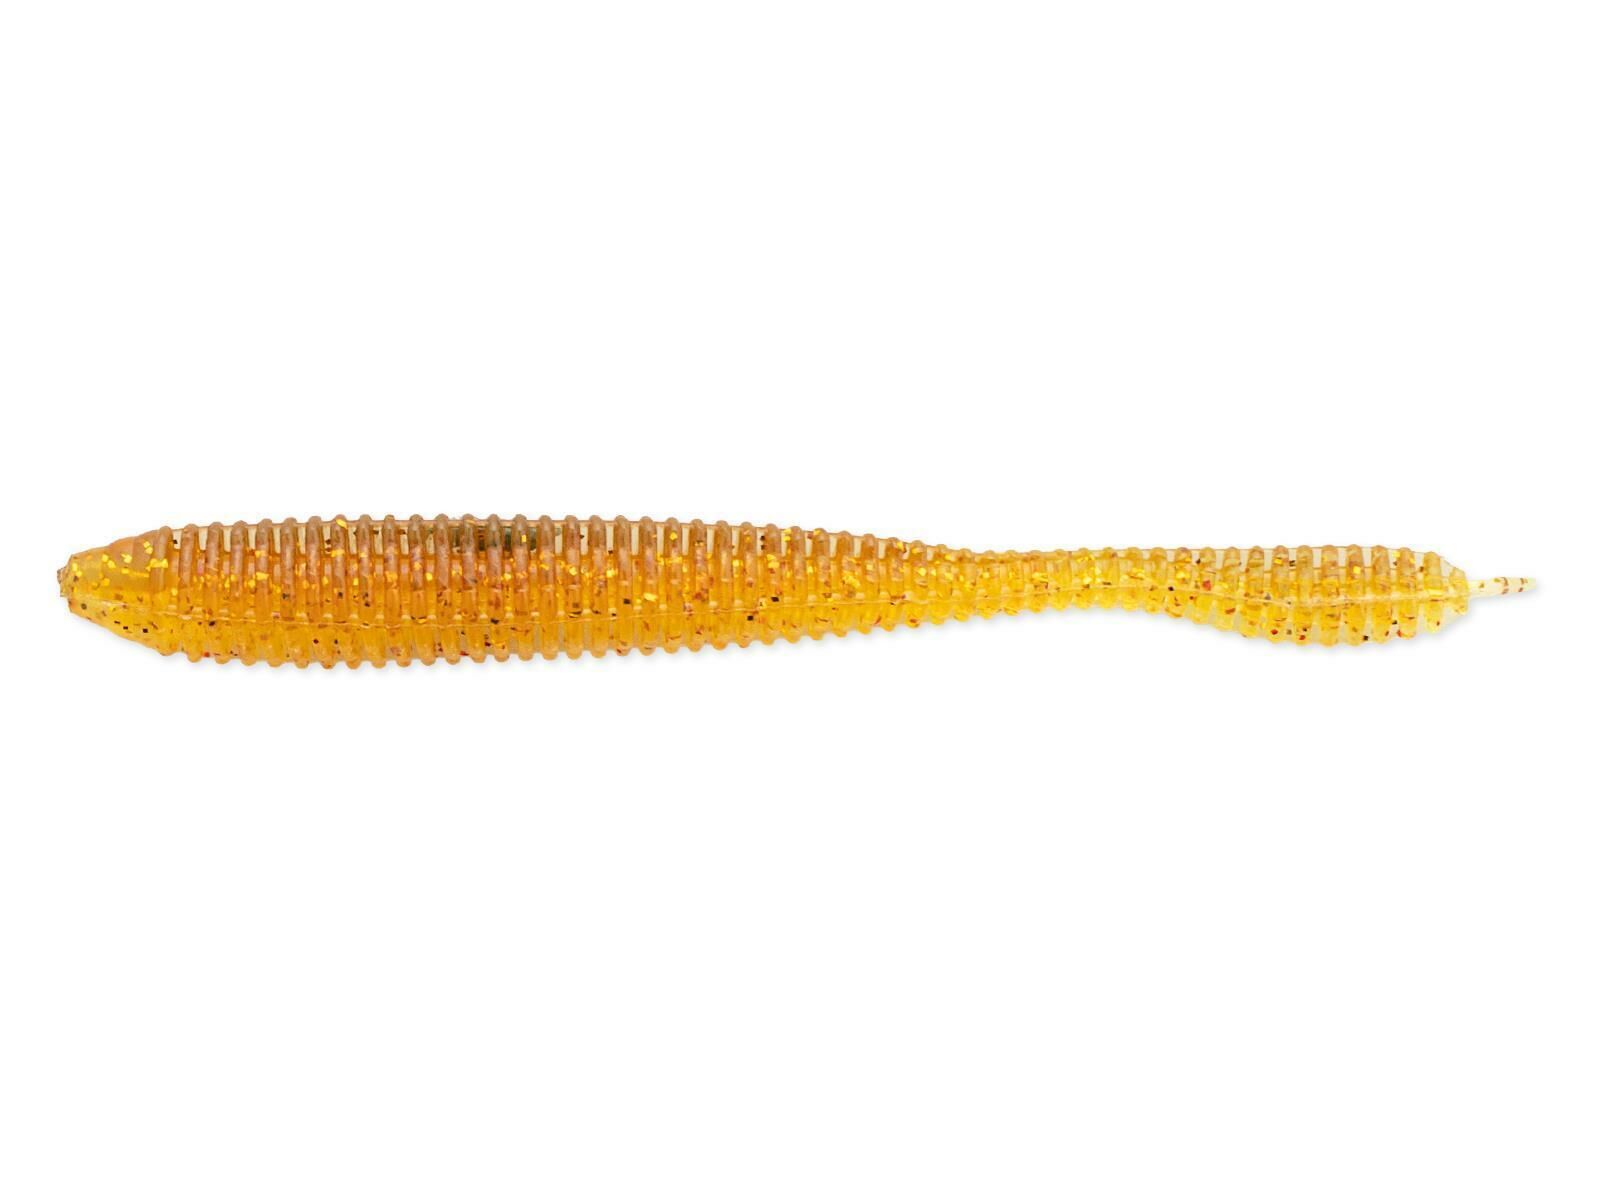 3.5" Bubbling Shaker - Golden Goby (BA-Edition)